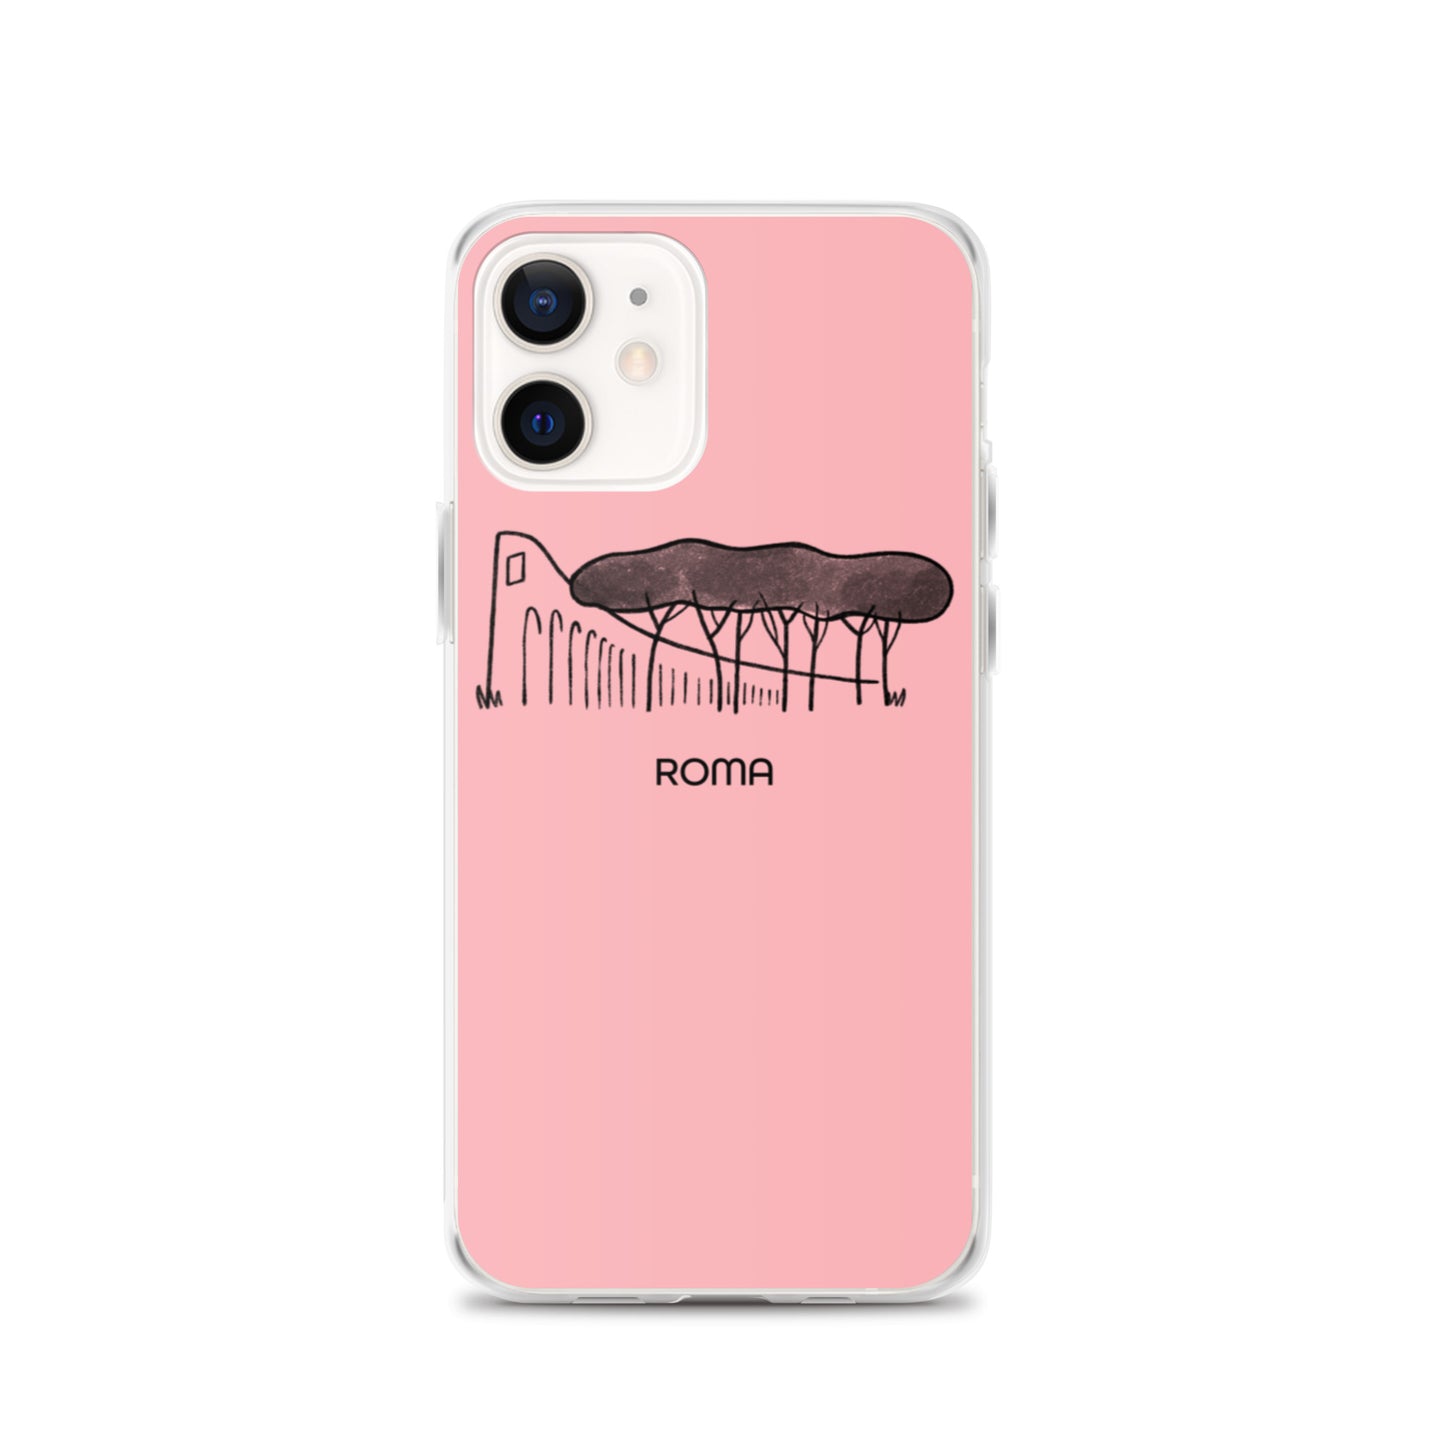 Roman Pine Trees on an iPhone Case - it's pretty in pink!